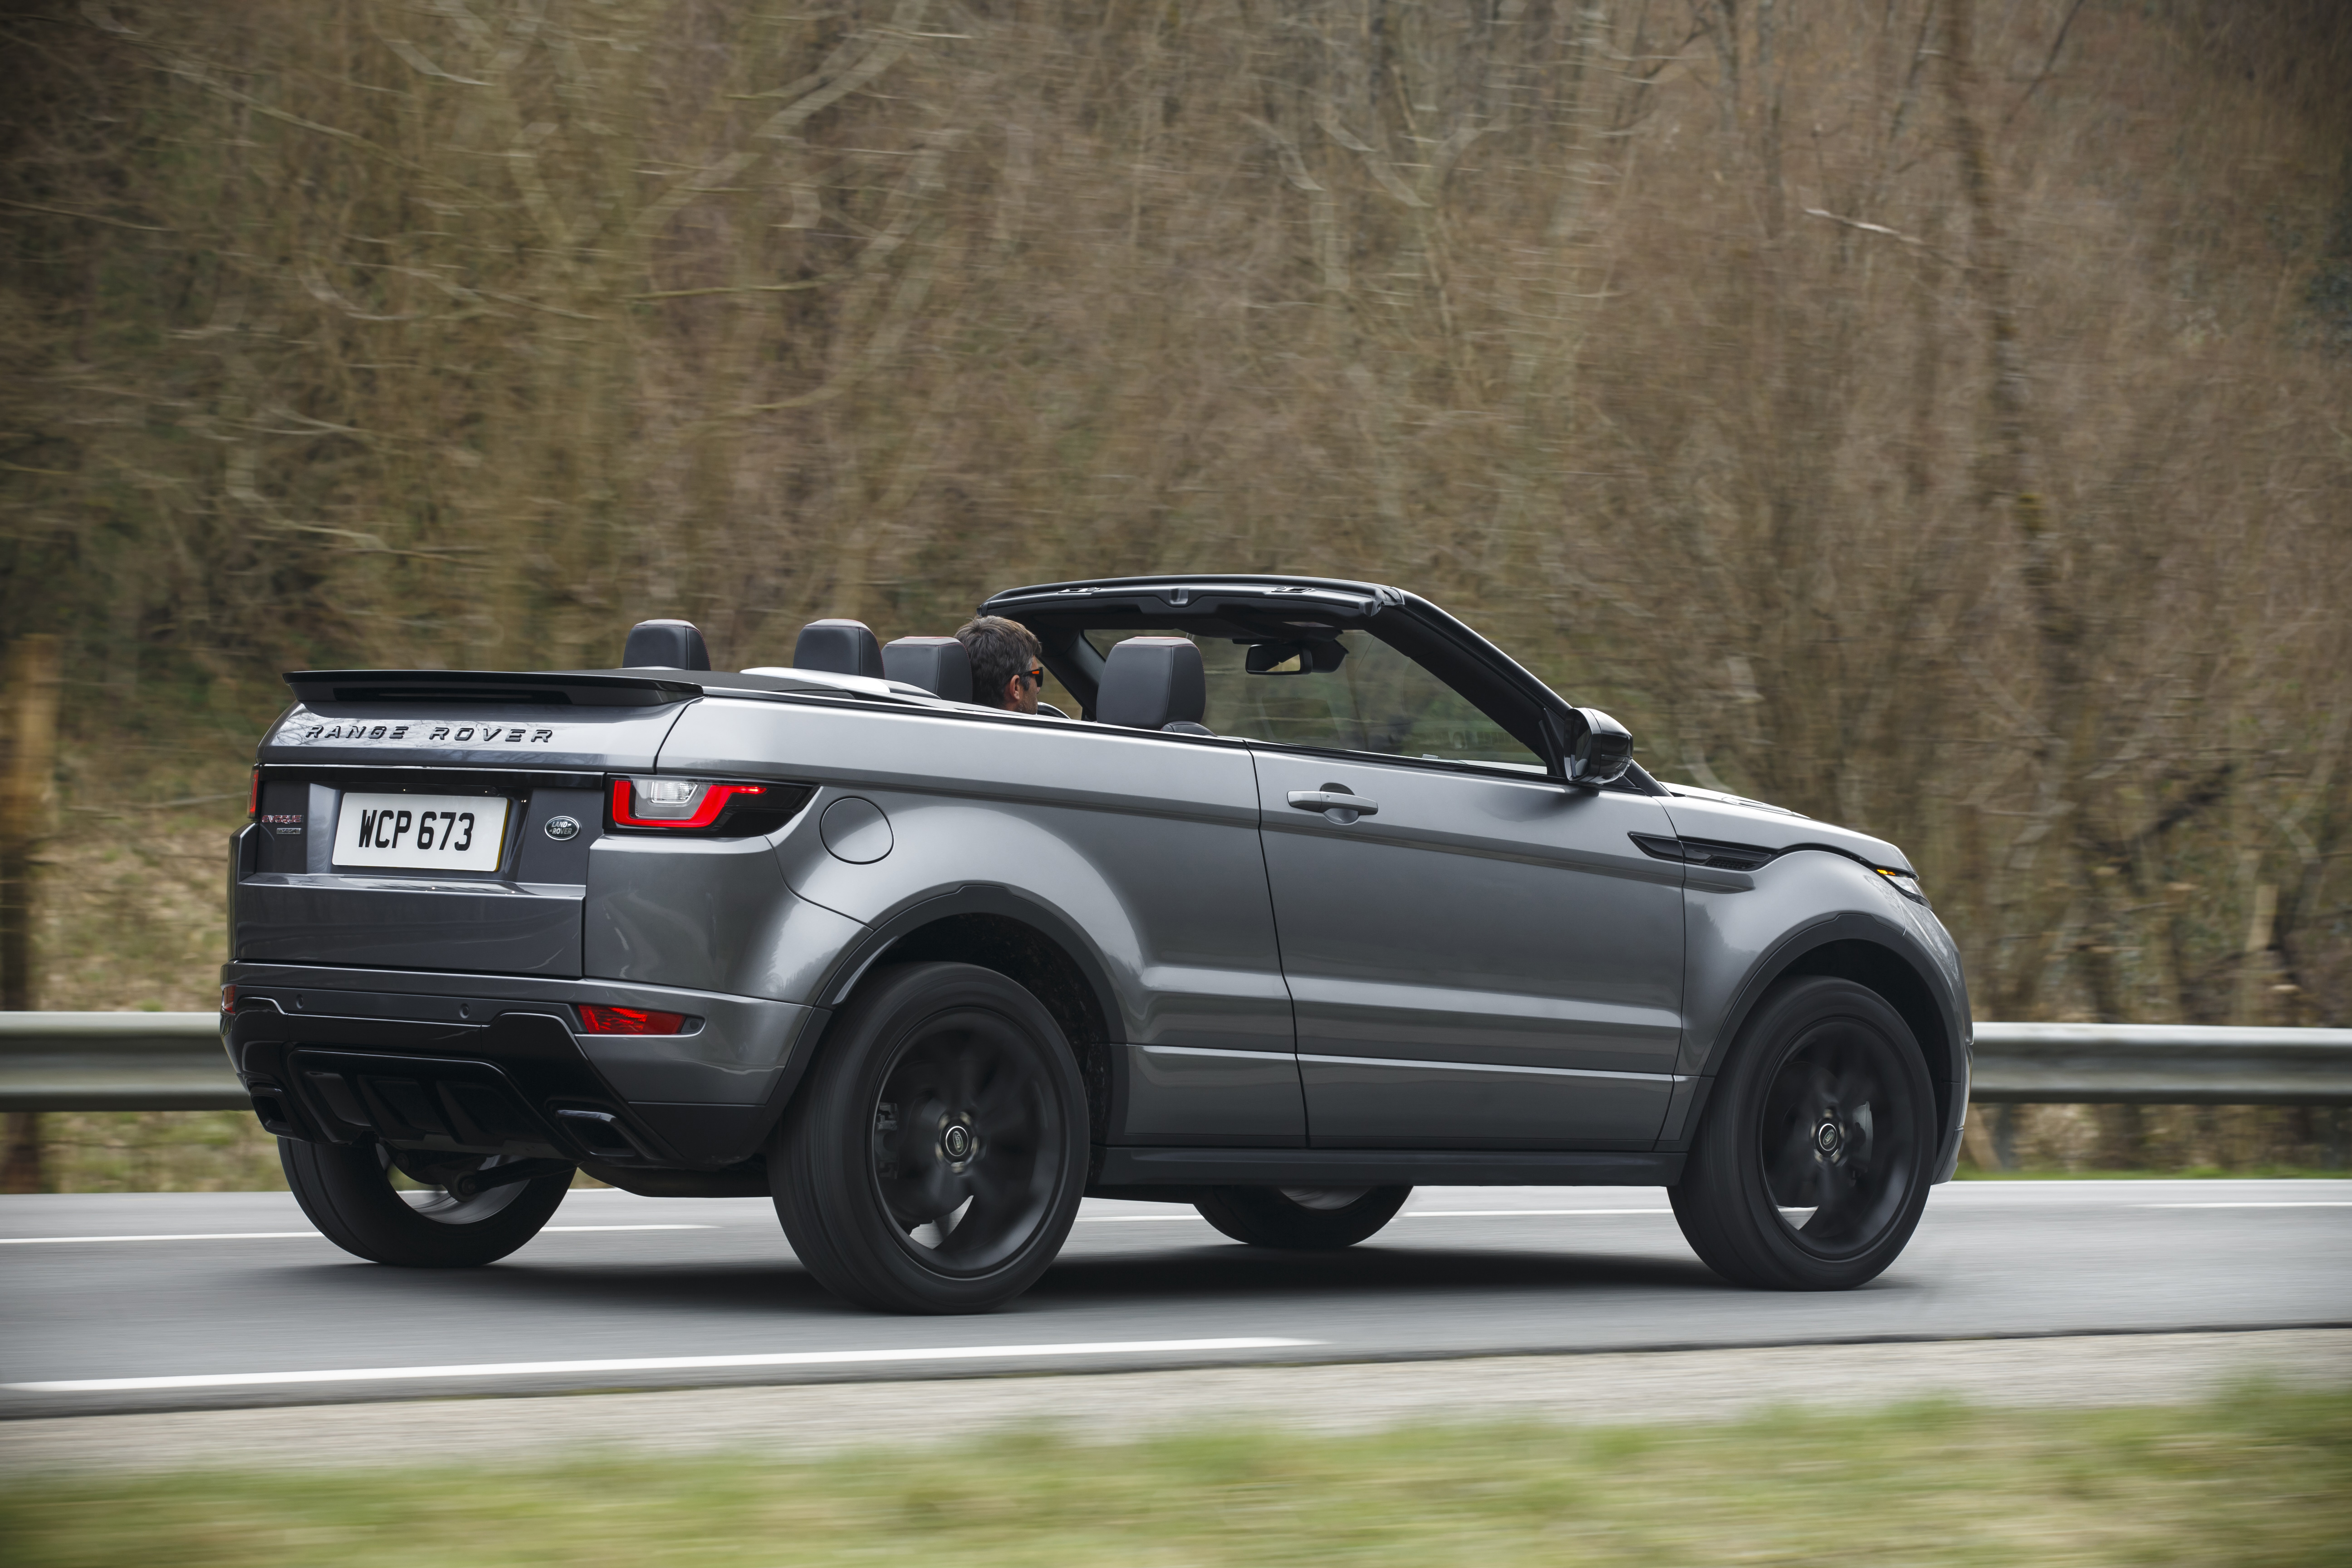 Land Rover Range Rover Evoque Convertible mod restyling